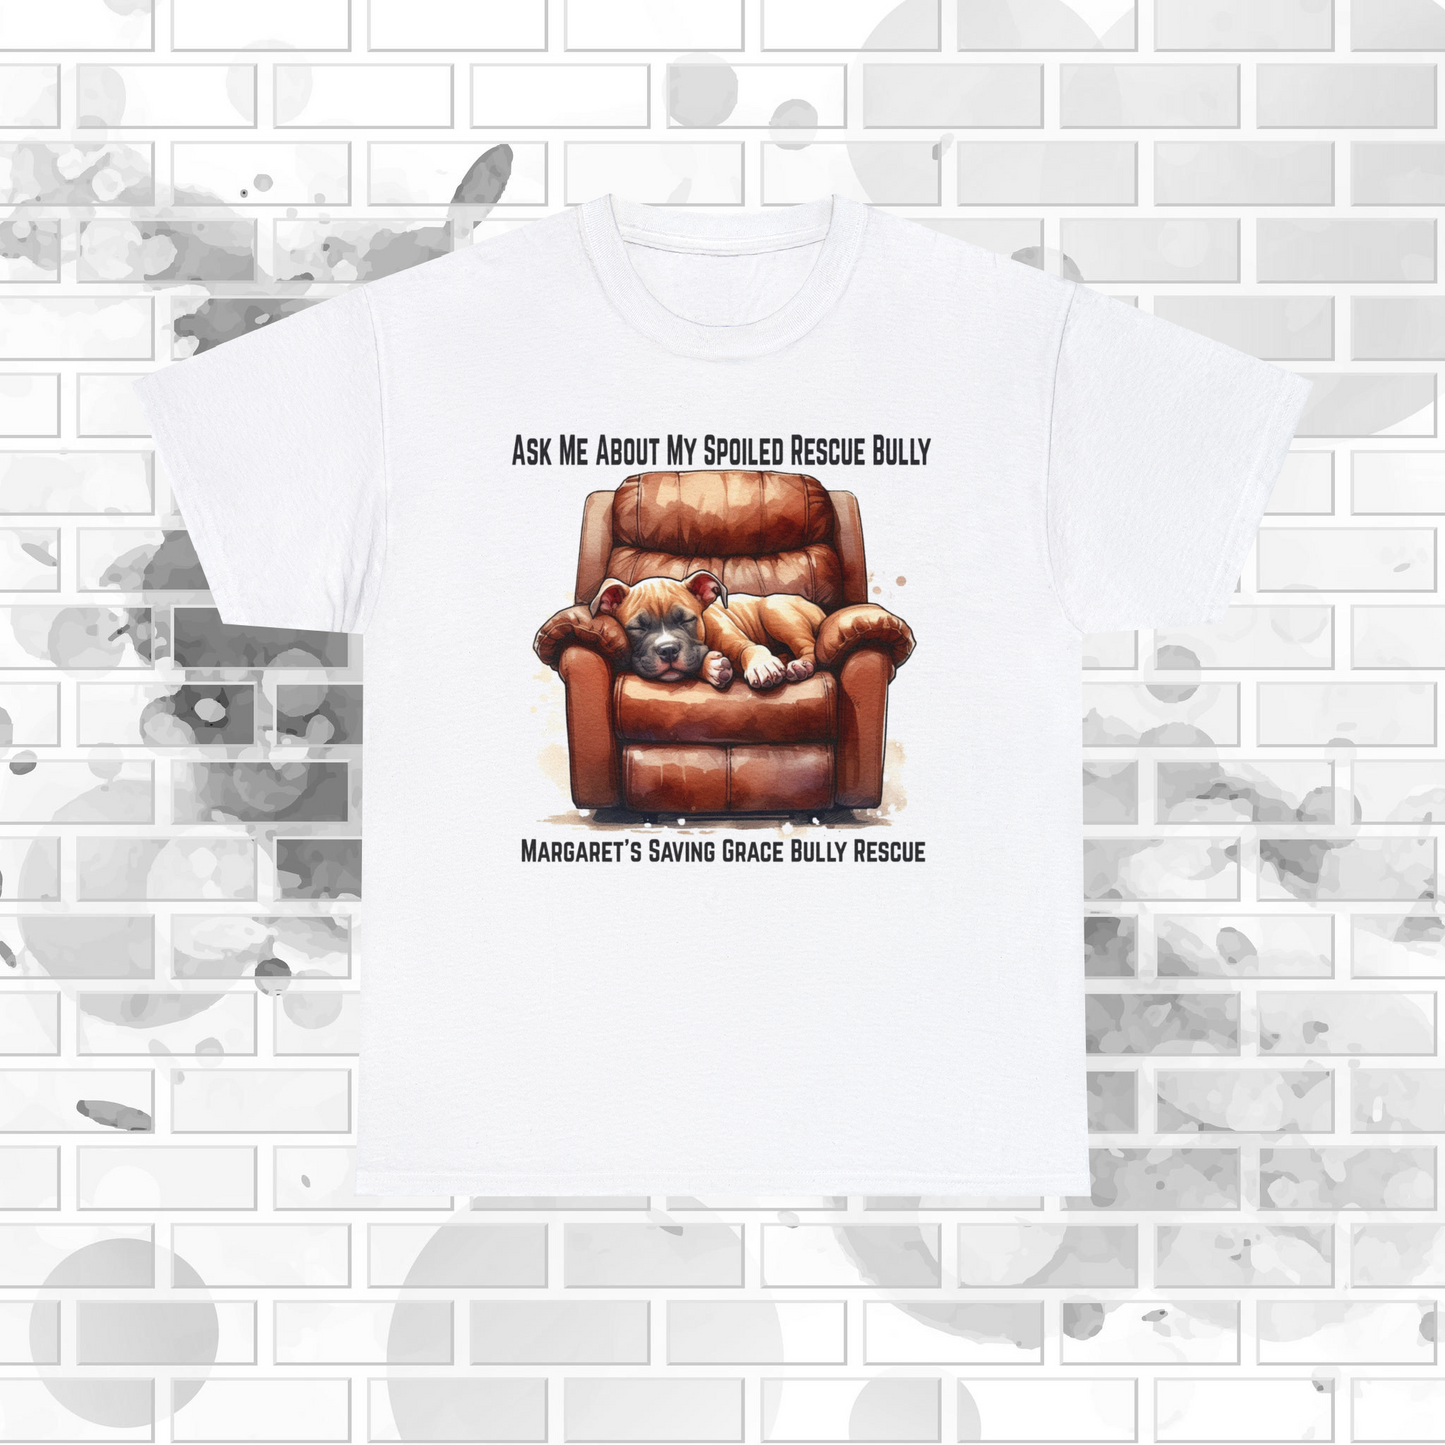 MSGBR Bully Rescue Pitbull Dog Breed Ask Me About Spoiled Rescue Bully On Recliner #2 White T Shirt